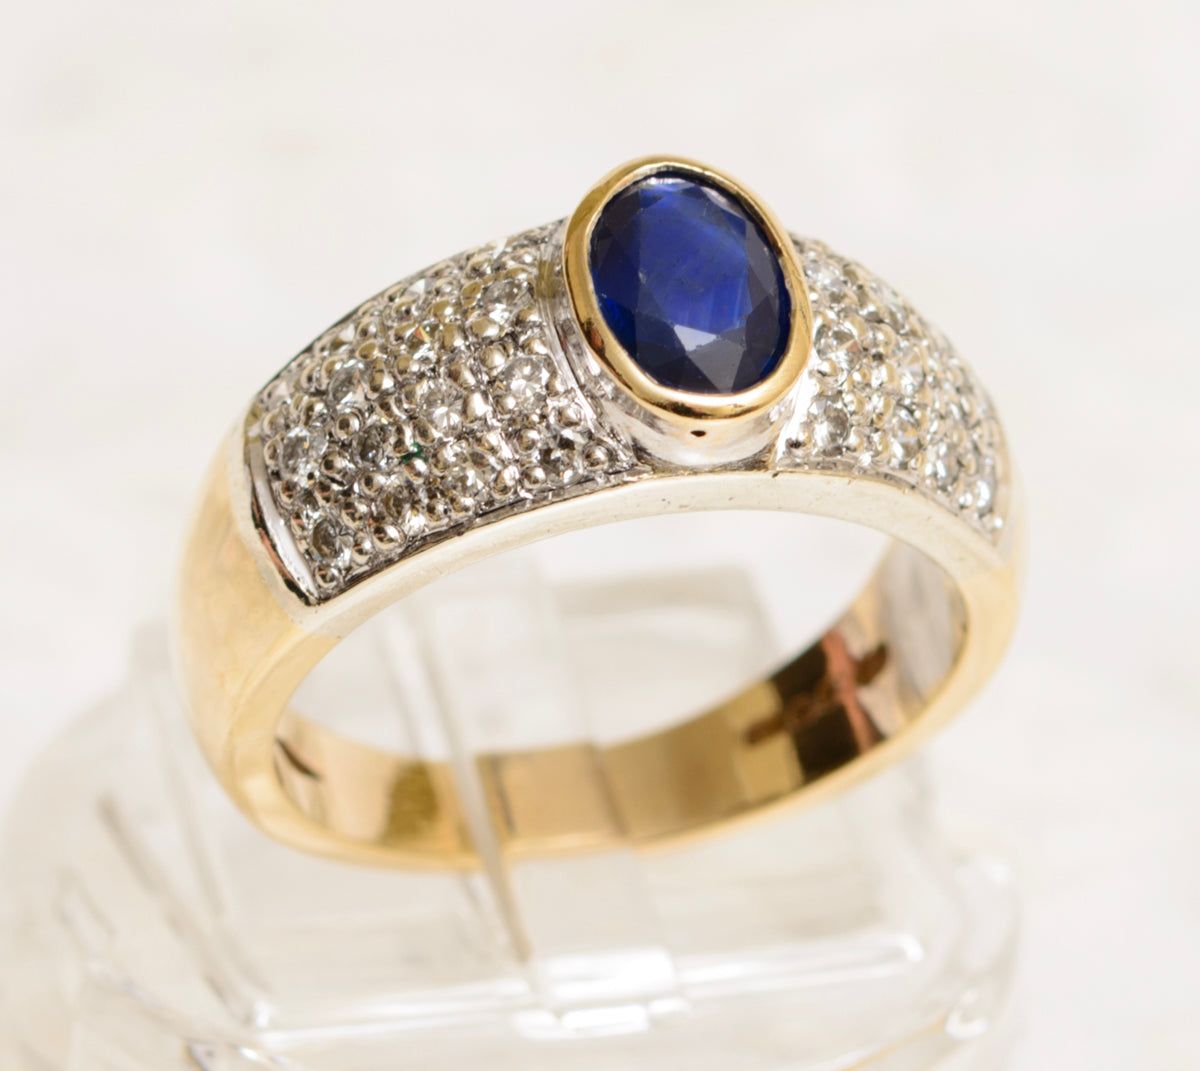 9ct Gold Ring With 1 Carat Natural Blue Sapphire & Pave Diamond Shoulders (A1901)